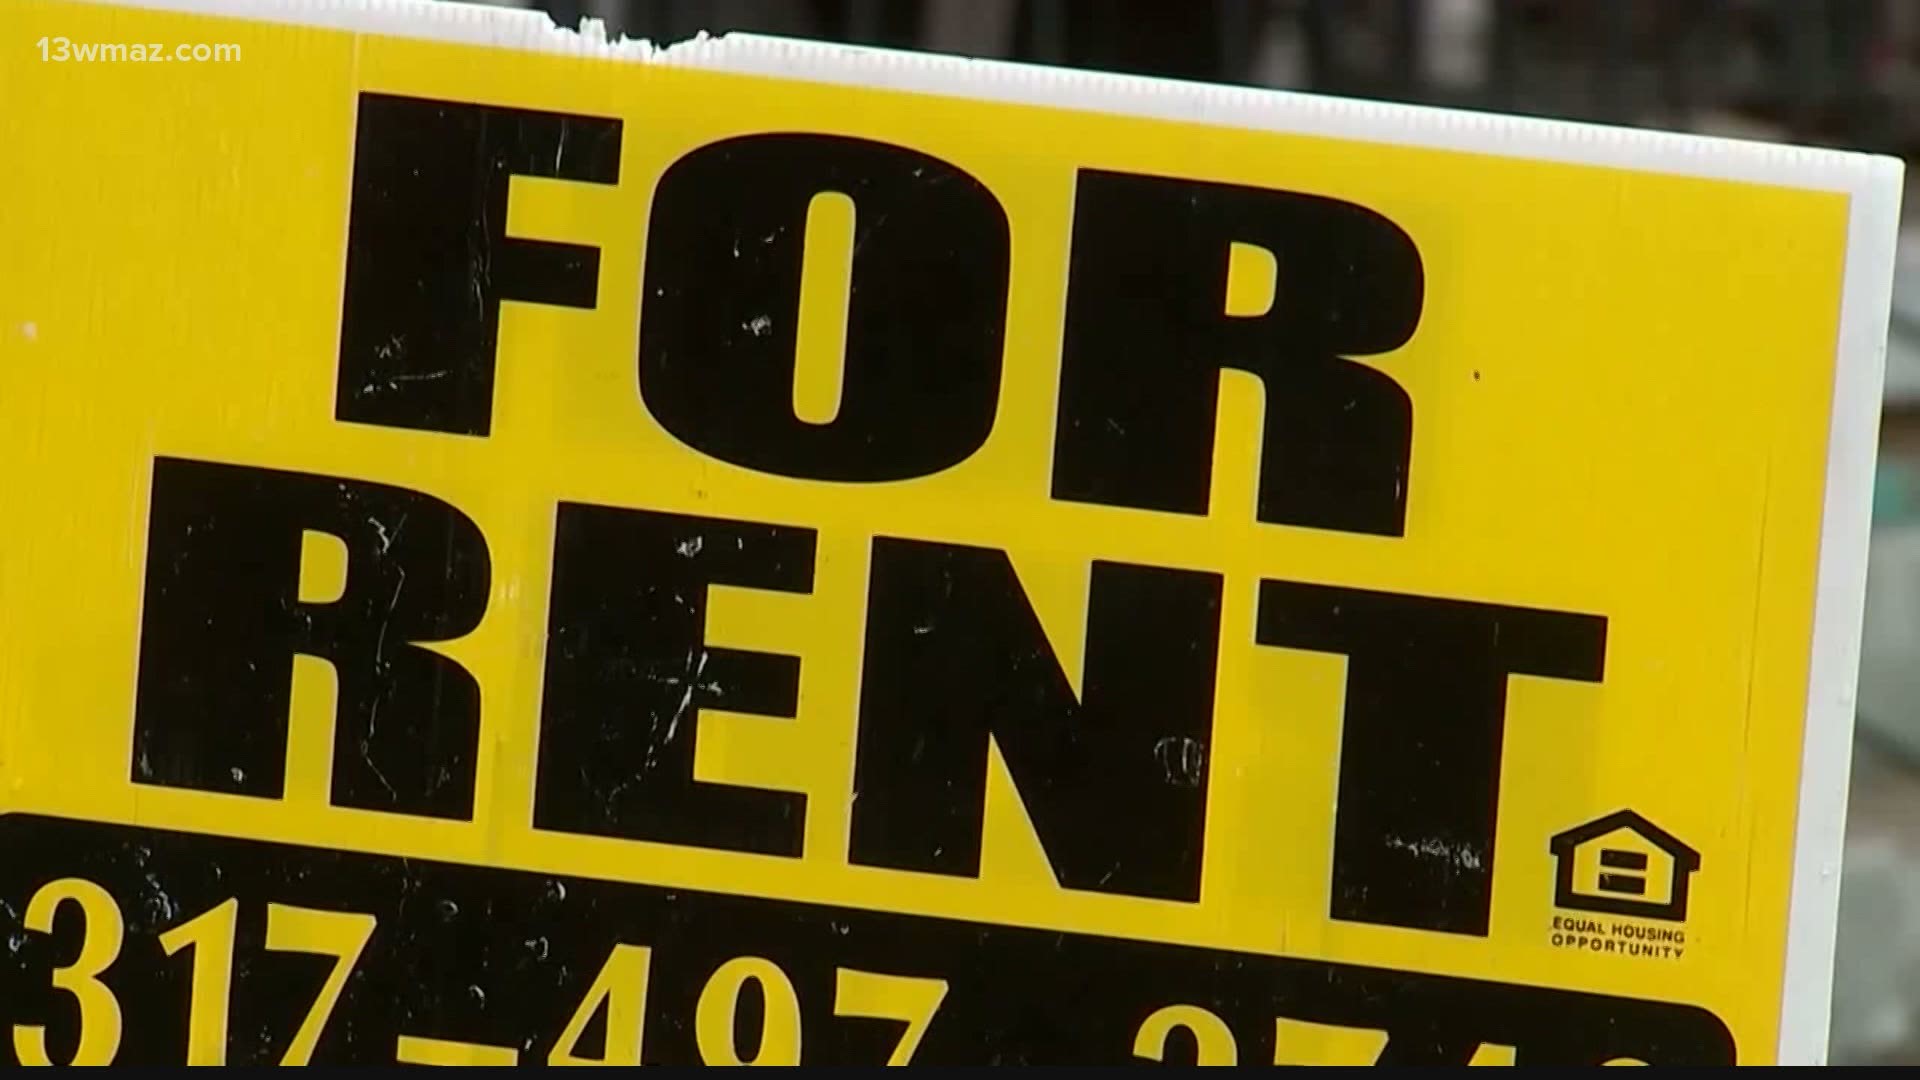 Next week, landlords in Central Georgia could be handing out hundreds of eviction notices.